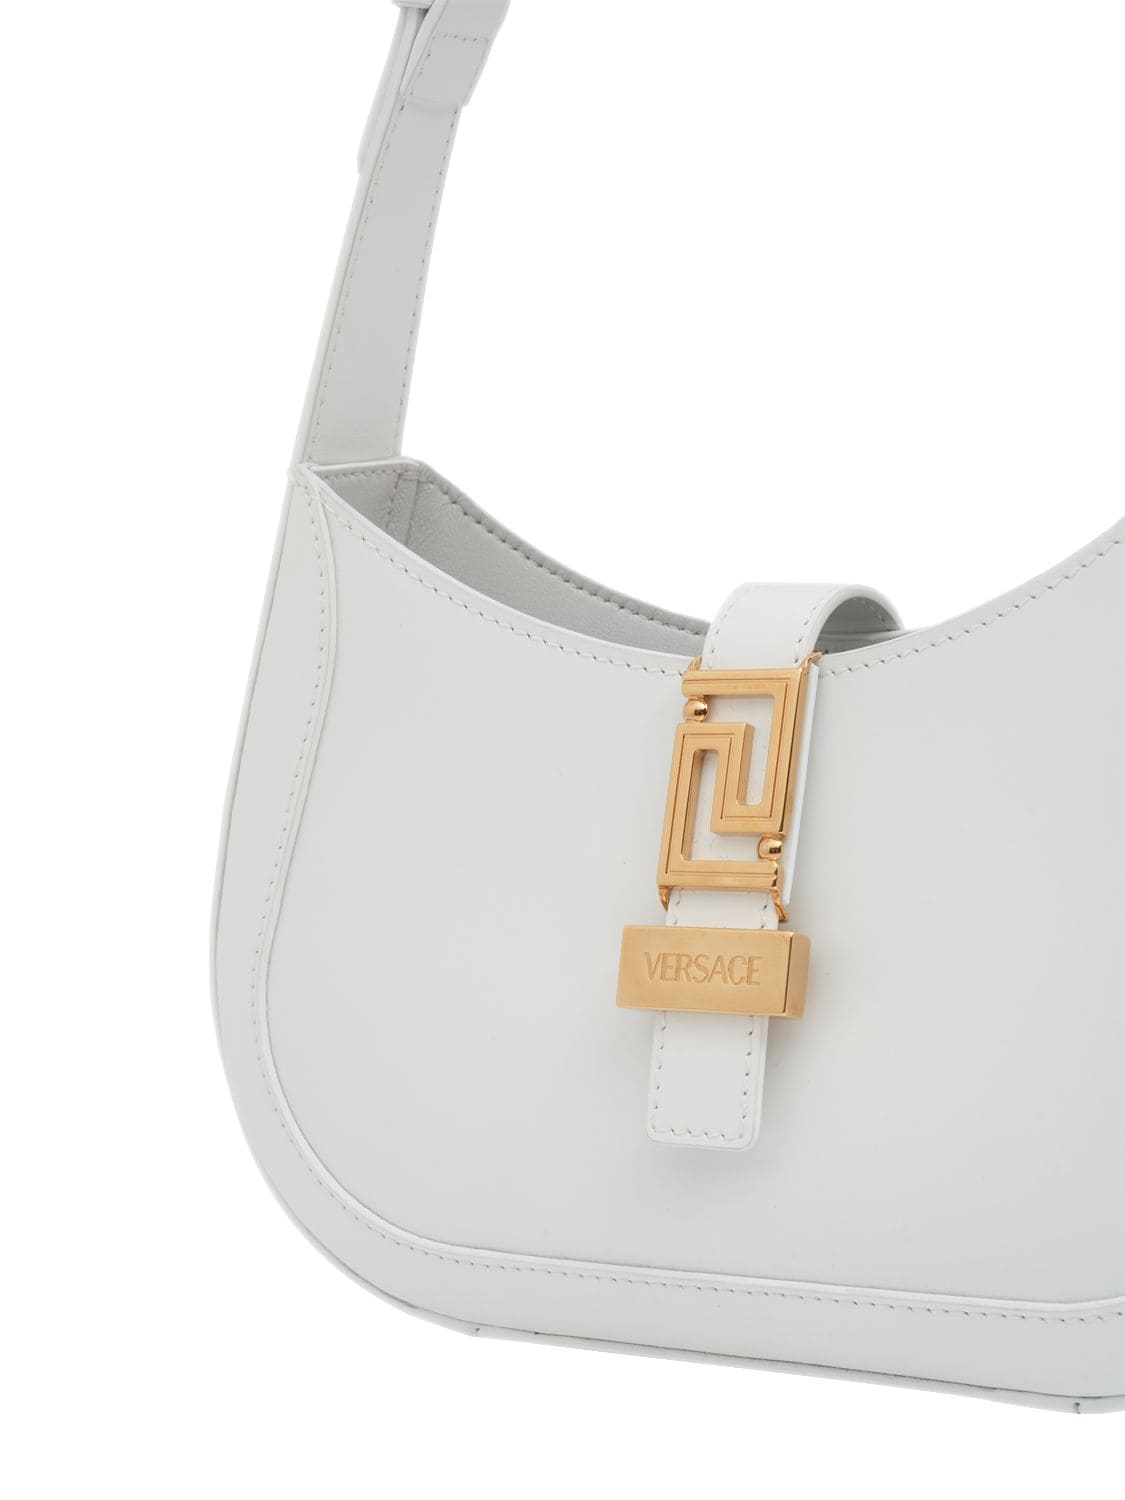 Shop Versace Small Leather Hobo Bag In Optical White